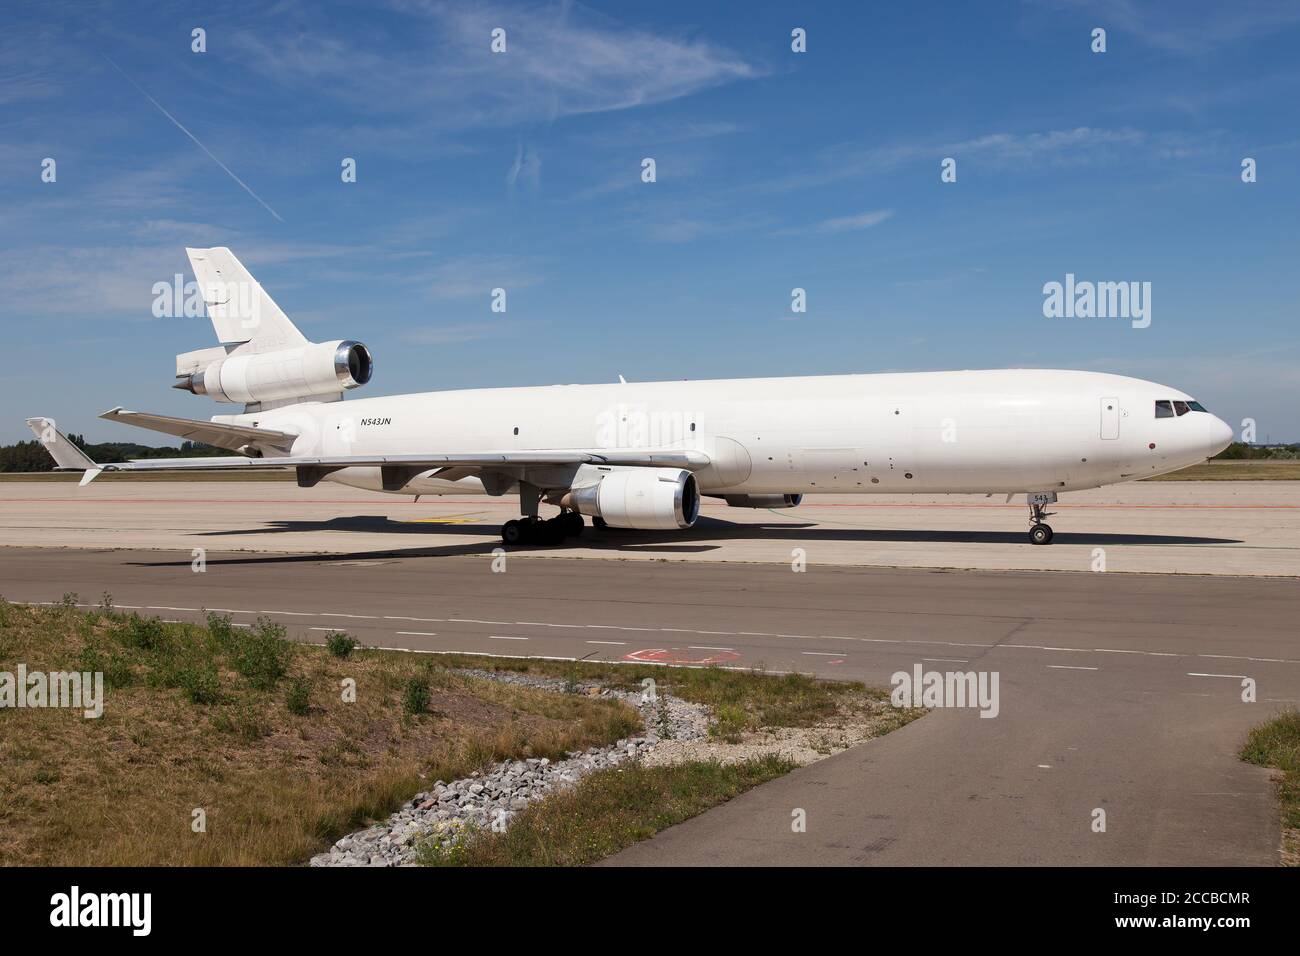 A Western Global Airlines McDonnell Douglas MD-11(F) resting at Liege Bierset airport. Stock Photo